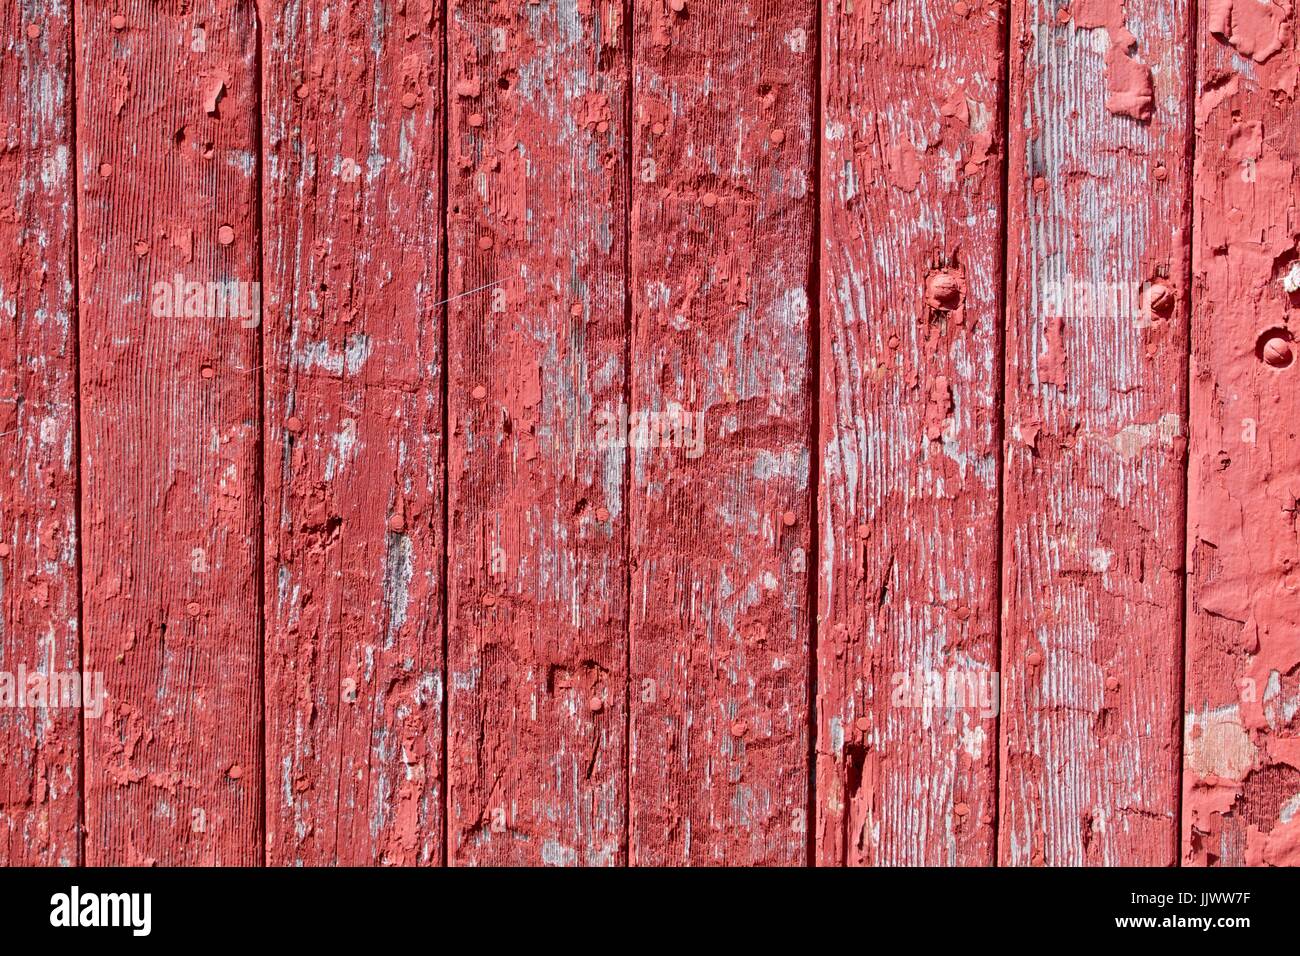 High Relief Vertical Barn Wood Stock Photo